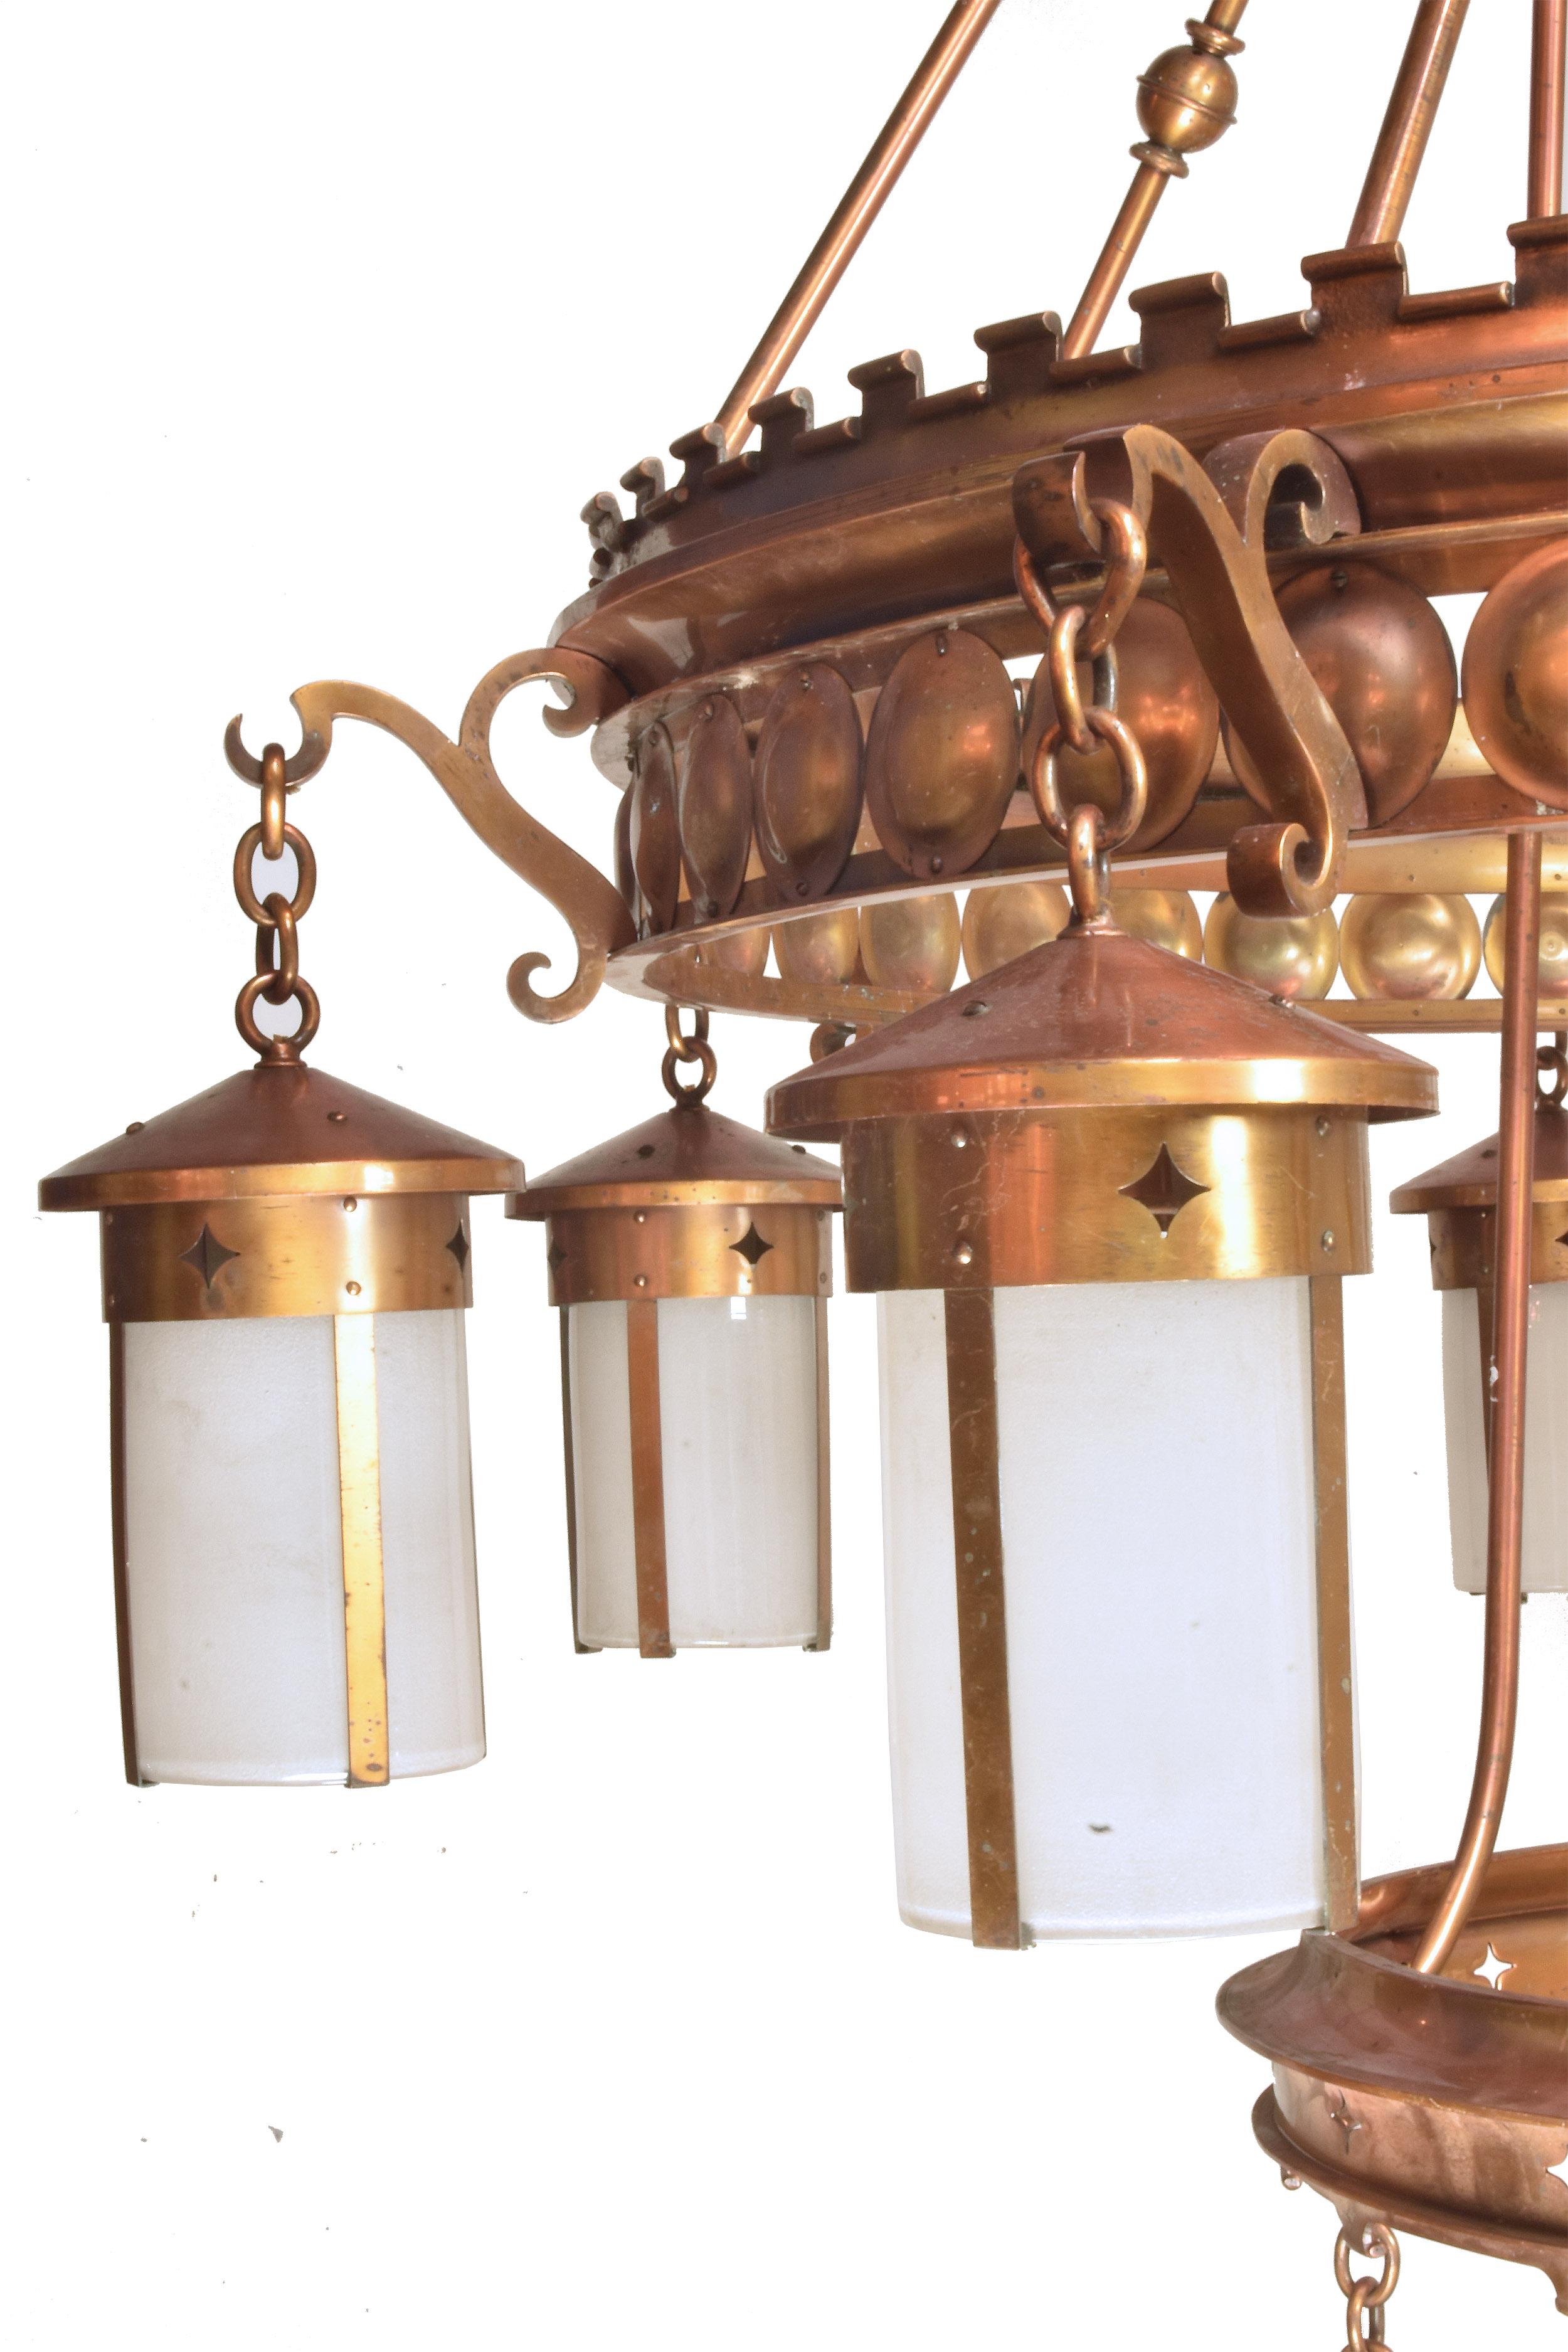 Twelve 7'‘ by 12” Lanterns on this oversized Arts & Crafts (1910) chandelier will provide beautiful illumination for any large space. The fixture has a beautiful, rich patina. A matching pair make these even more of an statement of pure Arts &